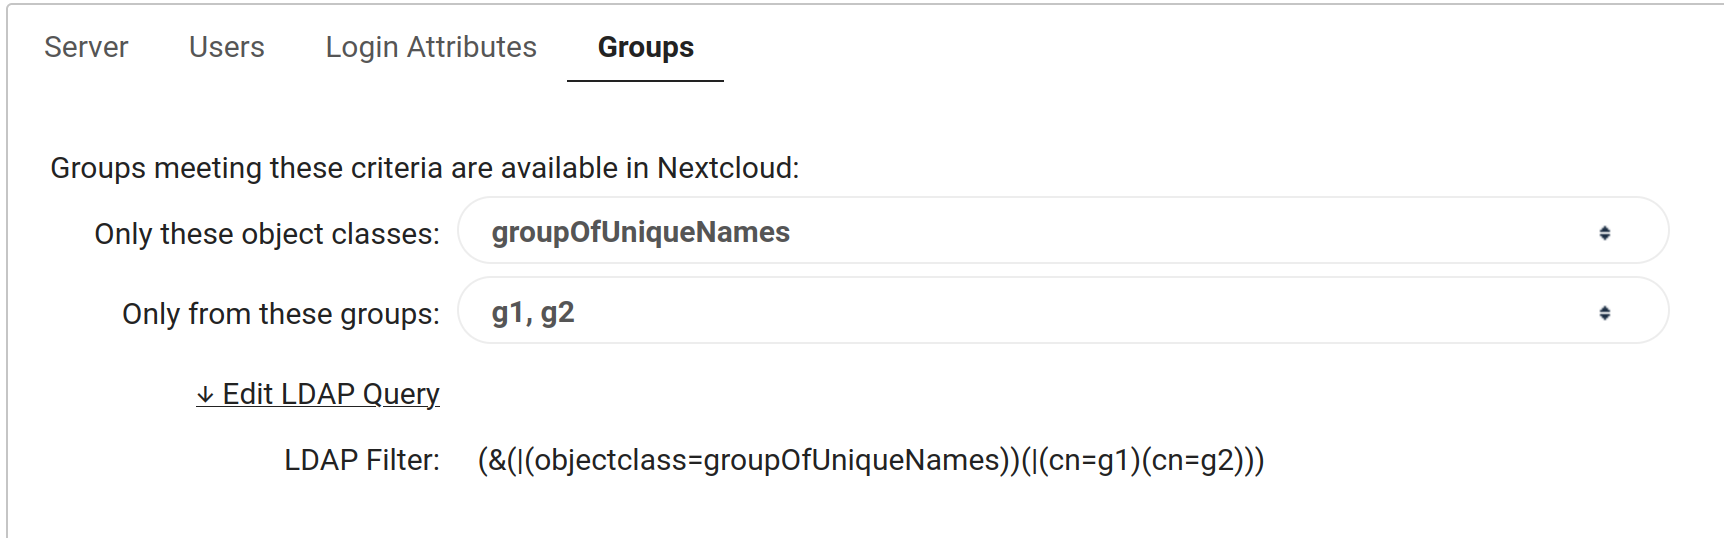 groups configuration page